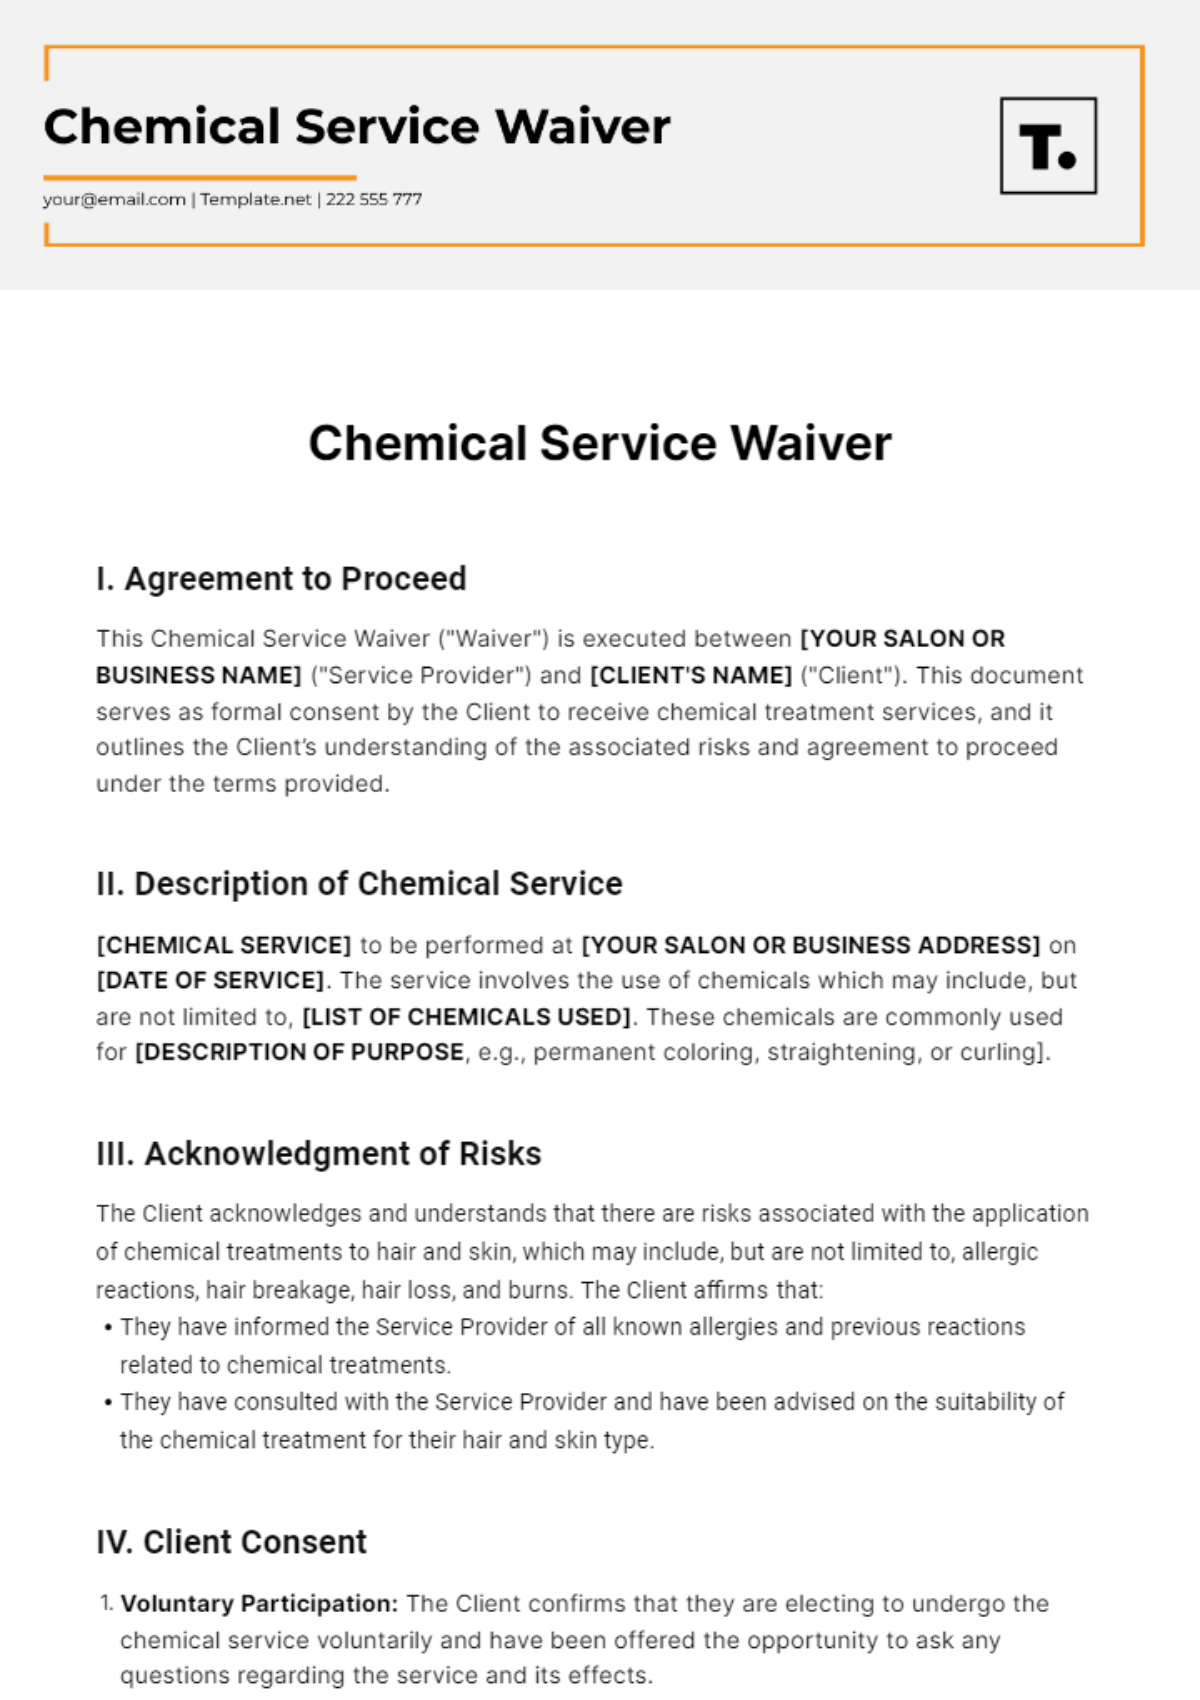 Free Chemical Service Waiver Template